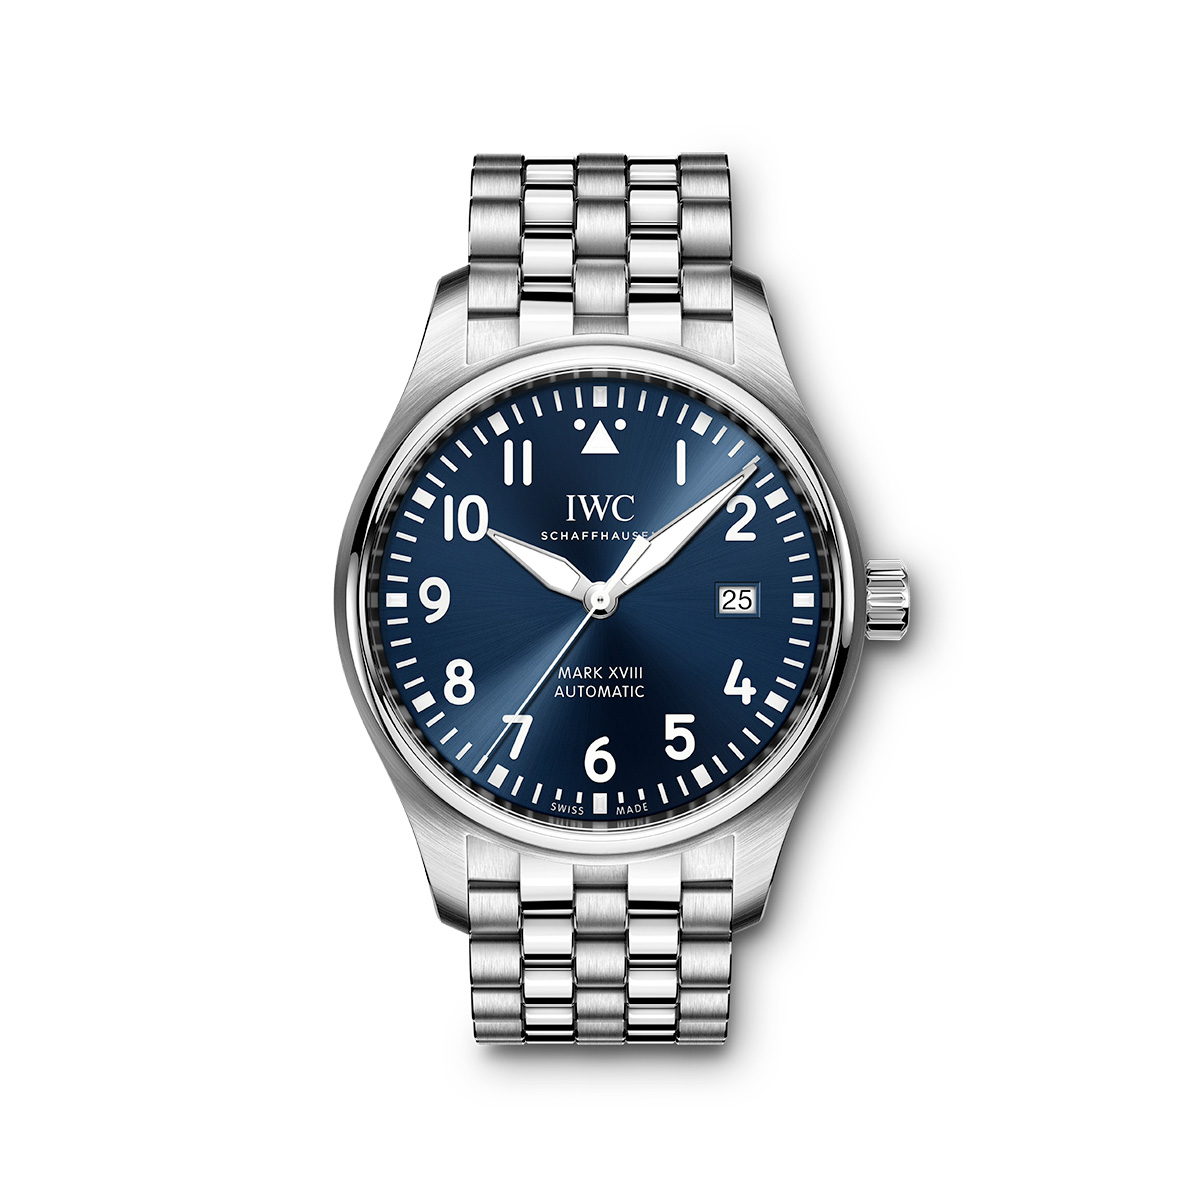 Picture of PILOT’S WATCH MARK XVIII EDITION “LE PETIT PRINCE” - STEEL AUTOMATIC 40 MM